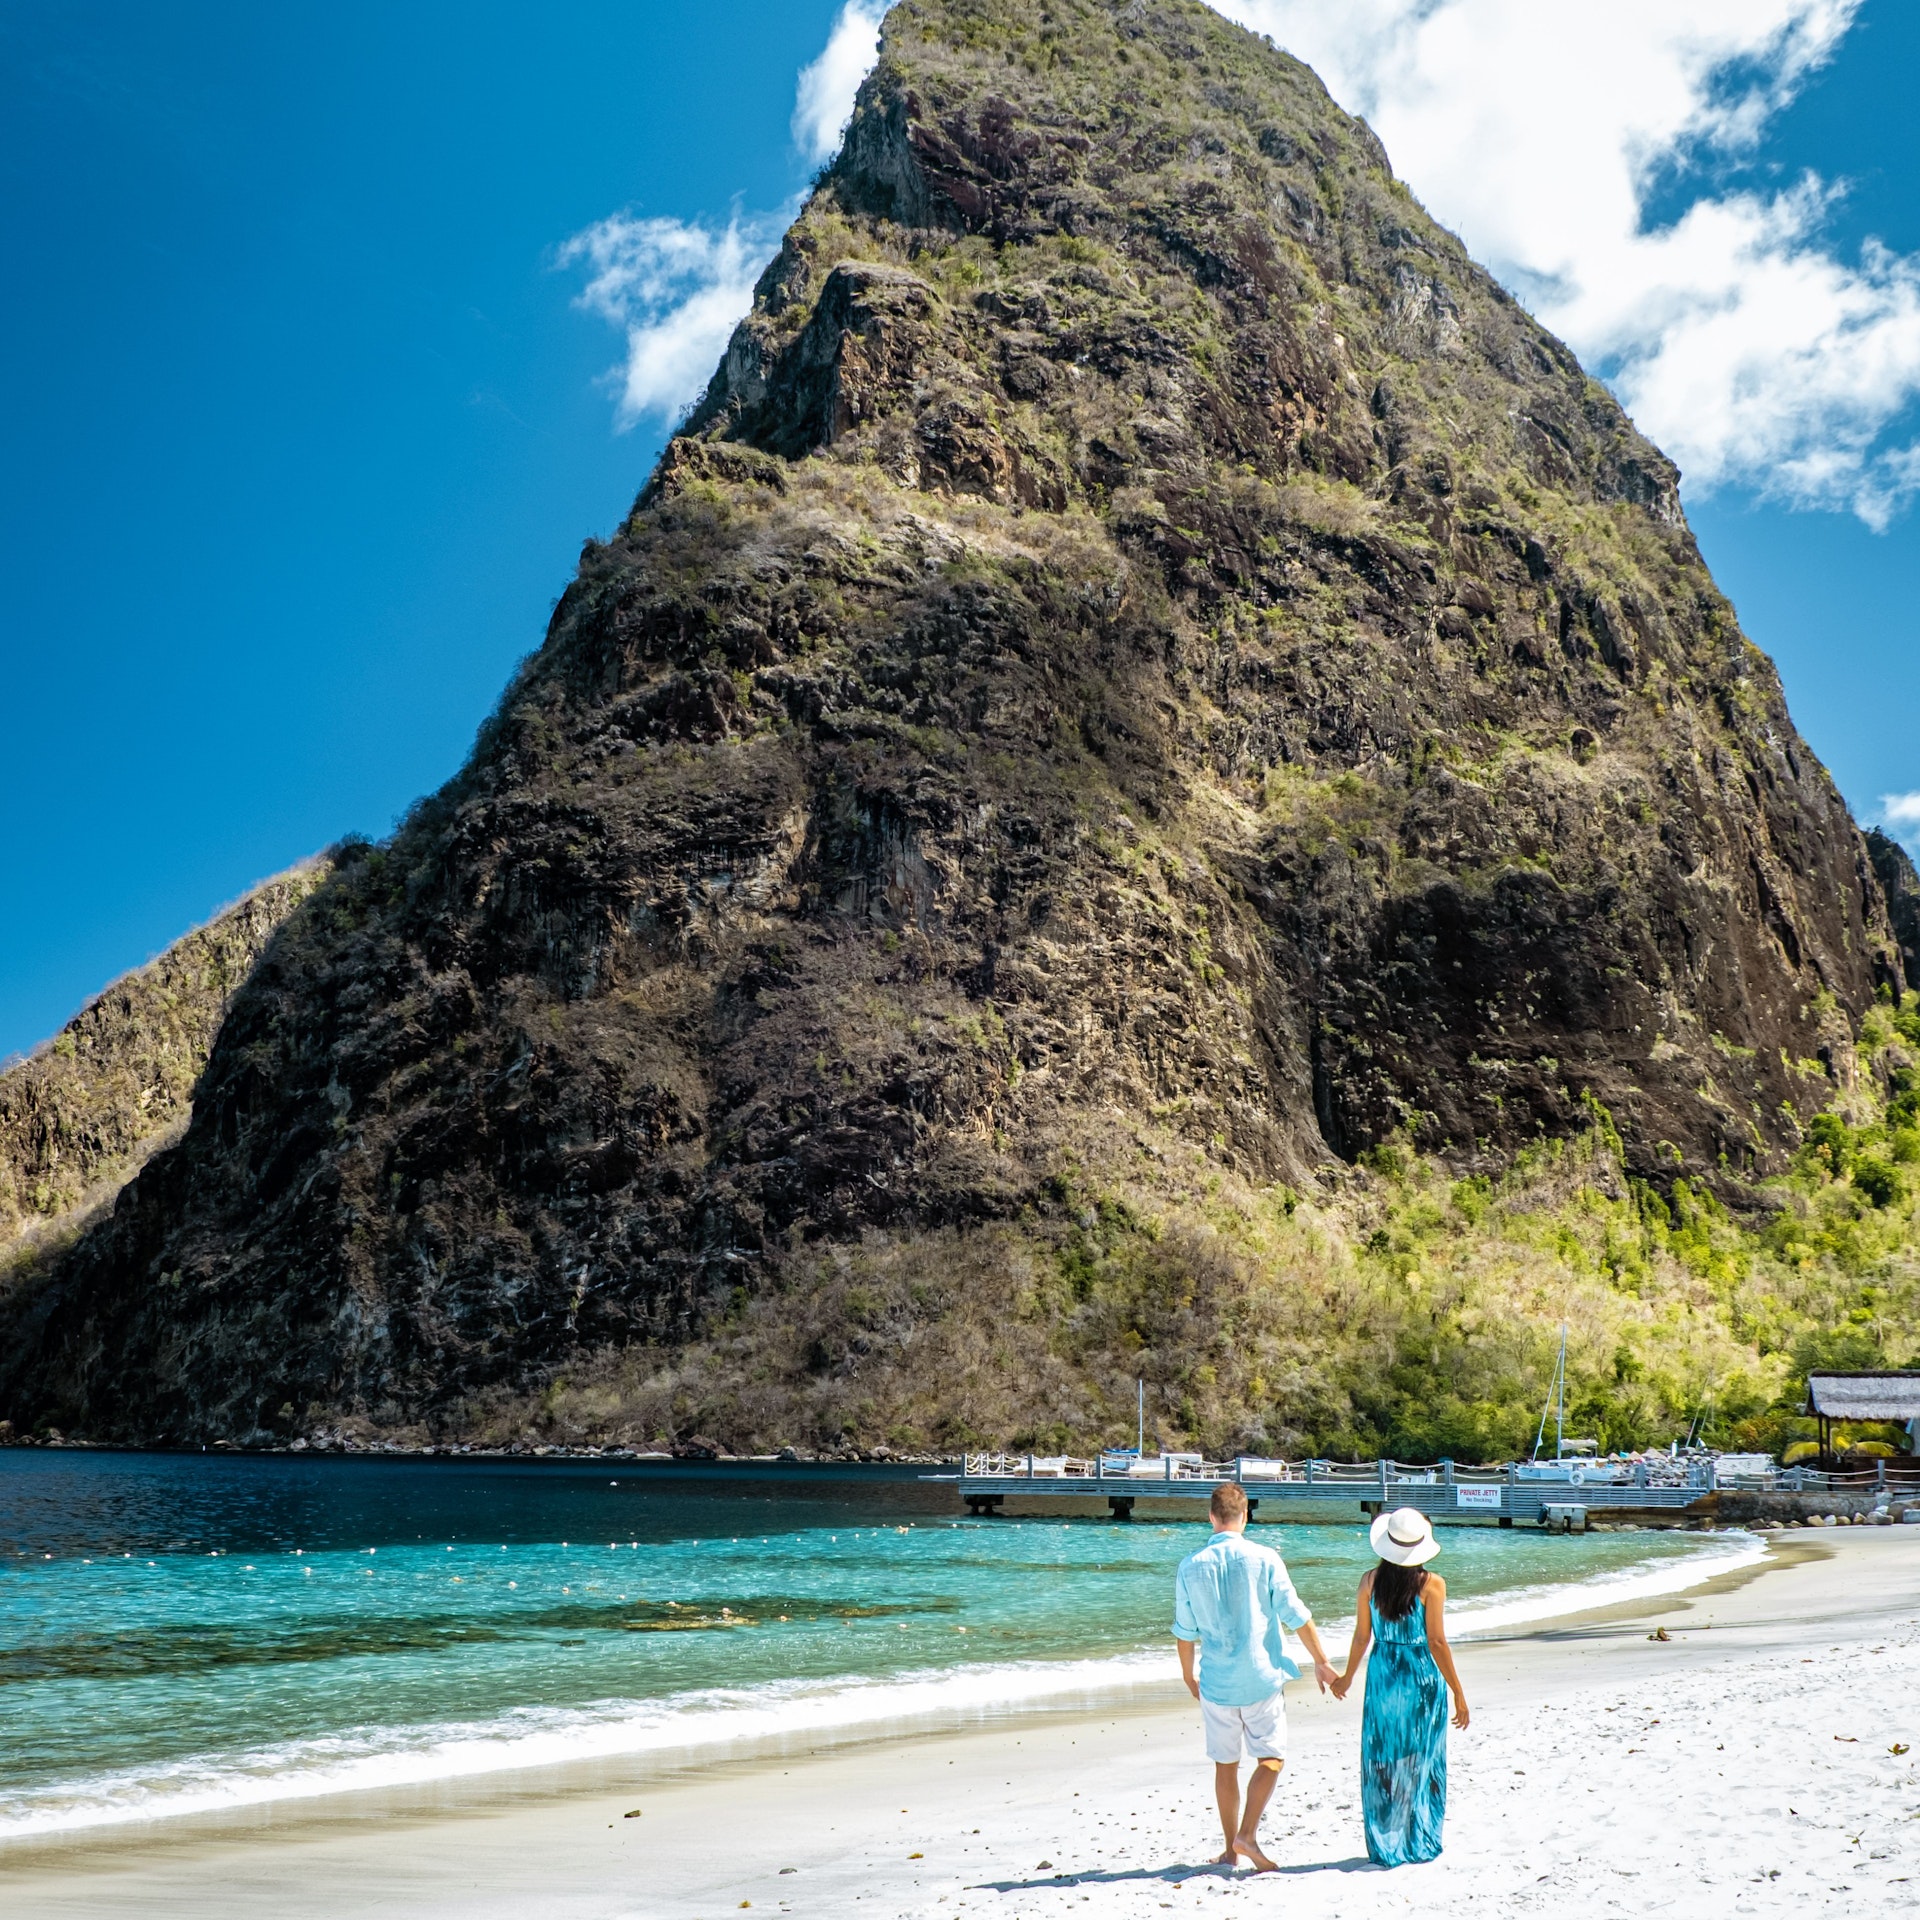 A couple walks on a beach in front of Gros Piton, St Lucia, Caribbean